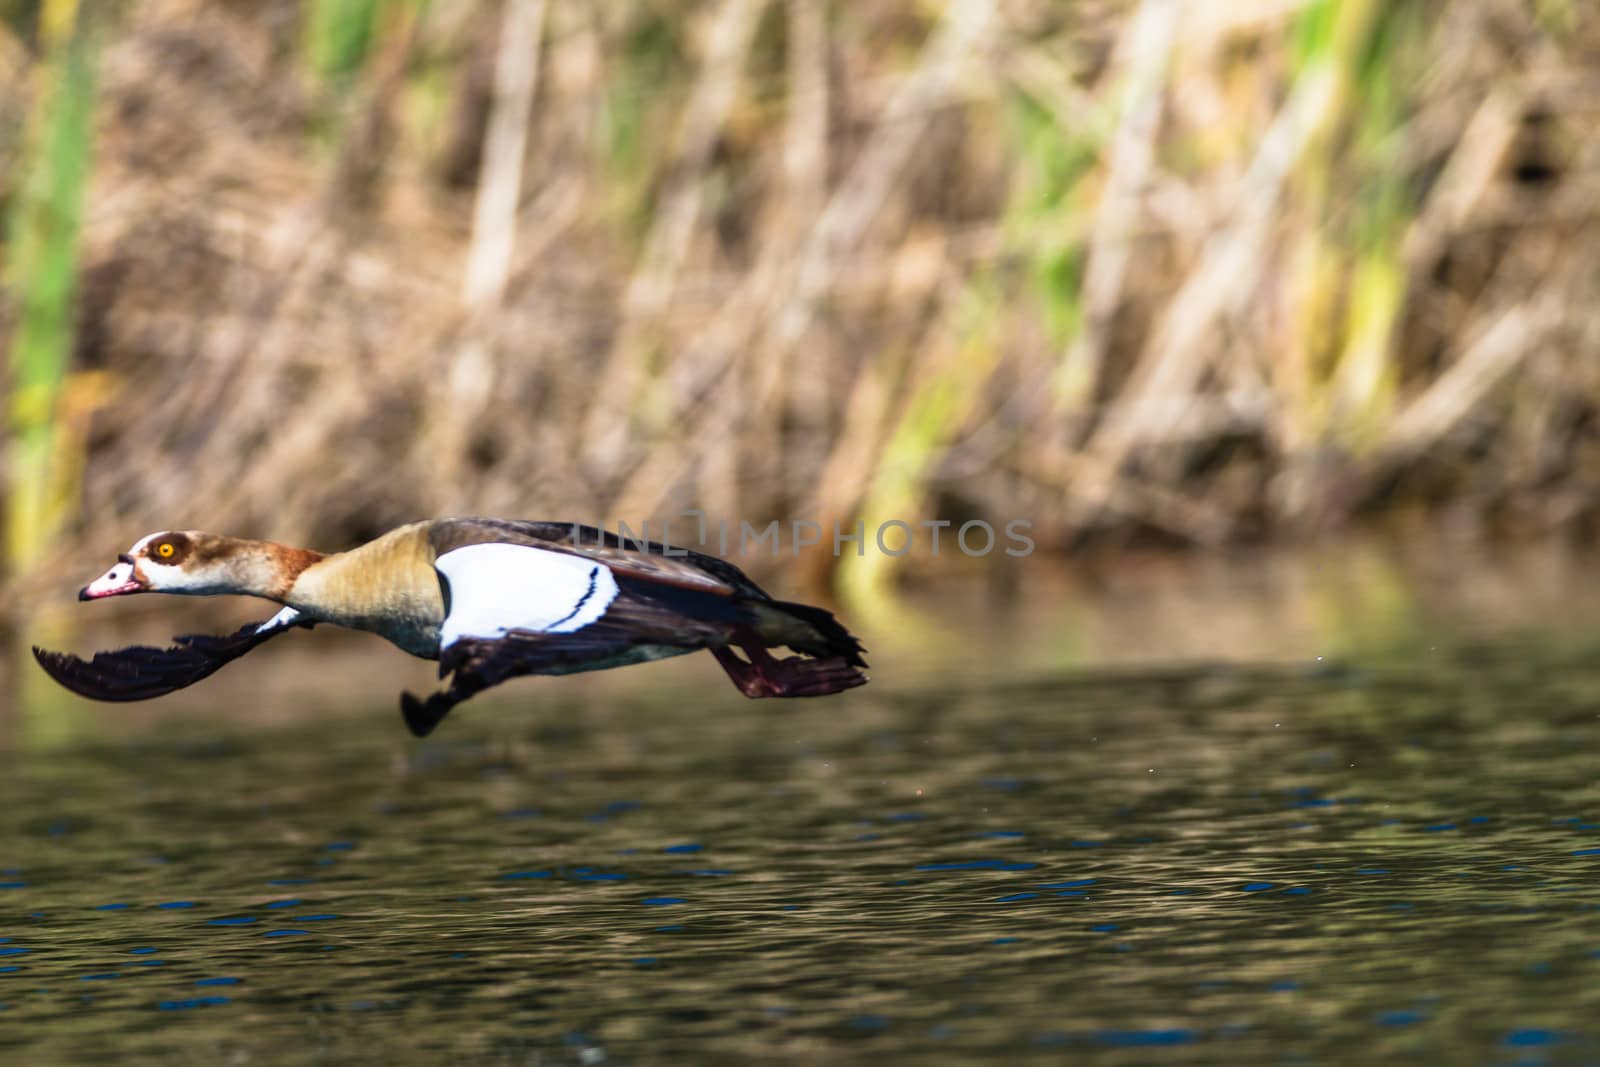 Egyptian Geese bird take-off run on the water for flight.